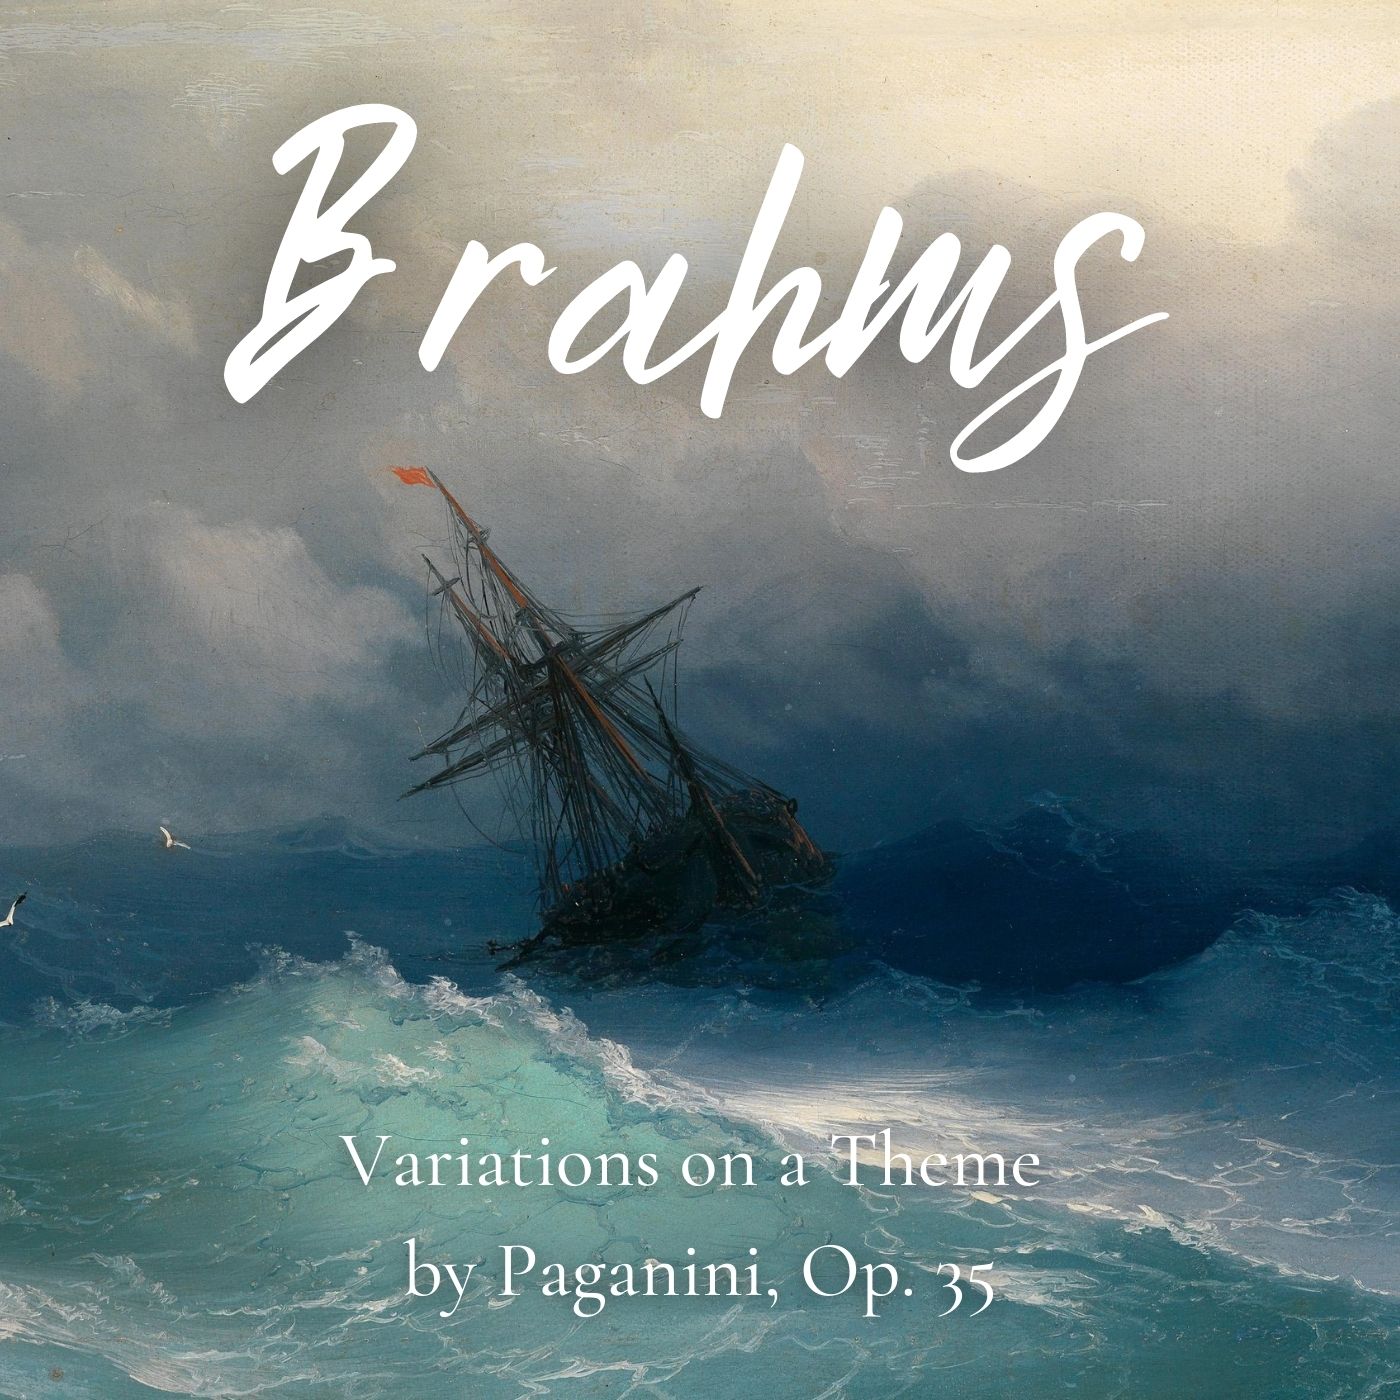 Brahms: Variations on a Theme by Paganini, Op. 35